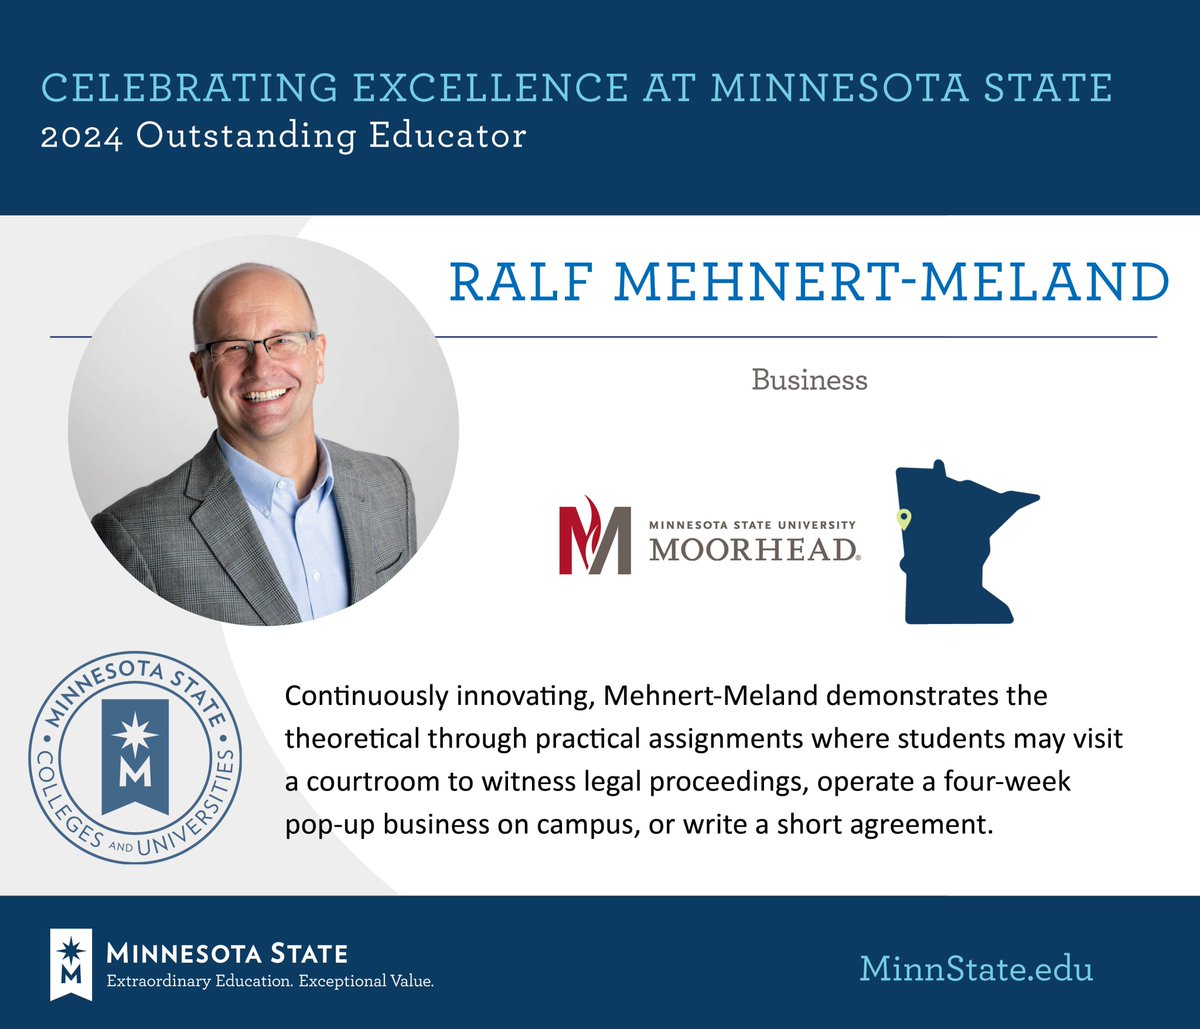 Ralf Mehnert-Meland from @MSUMoorhead was named as an Outstanding Educator at the 2024 Board of Trustees Awards. Congratulations! See more at MinnState.edu/BOTawards. #MinnStateBOTawards